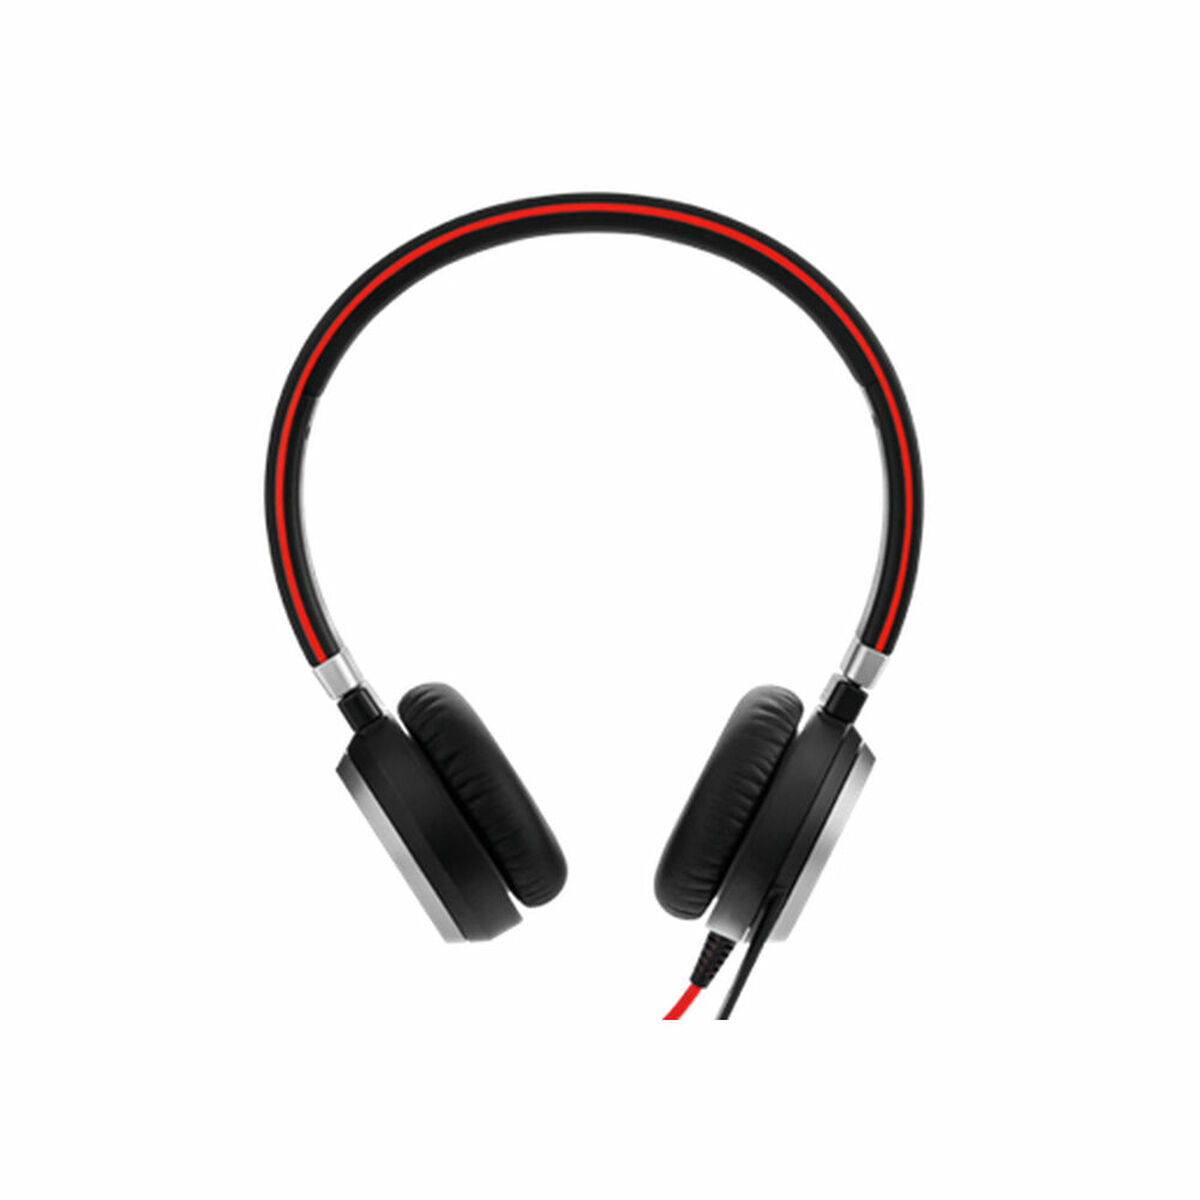 Headphones with Microphone Jabra 6399-823-109 Black, Jabra, Electronics, Mobile communication and accessories, headphones-with-microphone-jabra-6399-823-109-black, Brand_Jabra, category-reference-2609, category-reference-2642, category-reference-2847, category-reference-t-19653, category-reference-t-21312, category-reference-t-4036, category-reference-t-4037, computers / peripherals, Condition_NEW, entertainment, gadget, music, office, Price_100 - 200, RiotNook